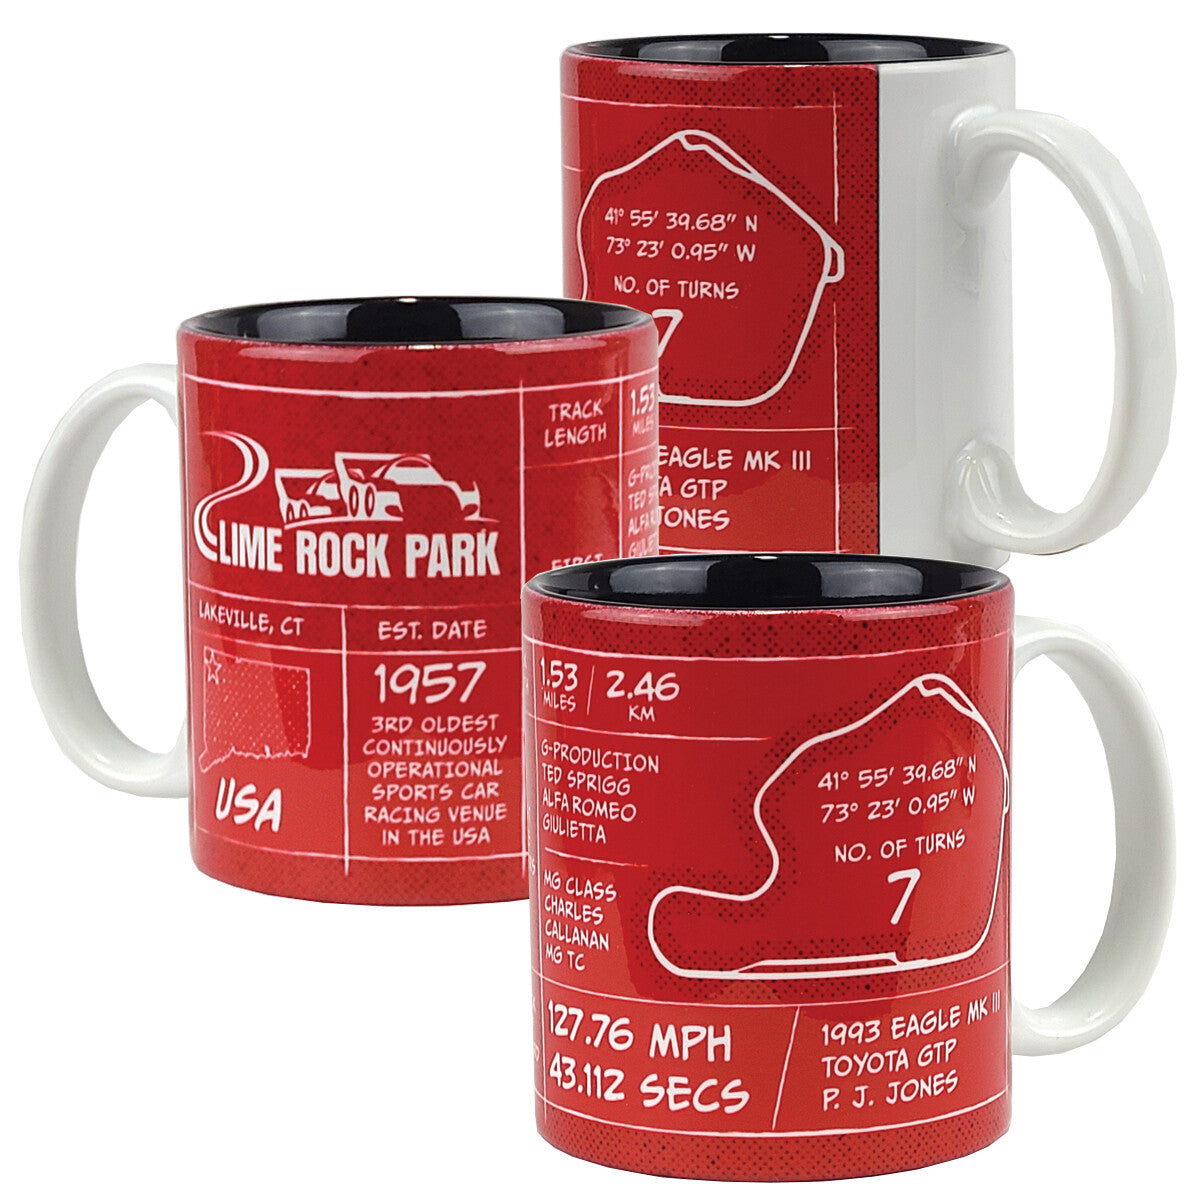 LRP Coffee Cup-Red/Black 11 oz.